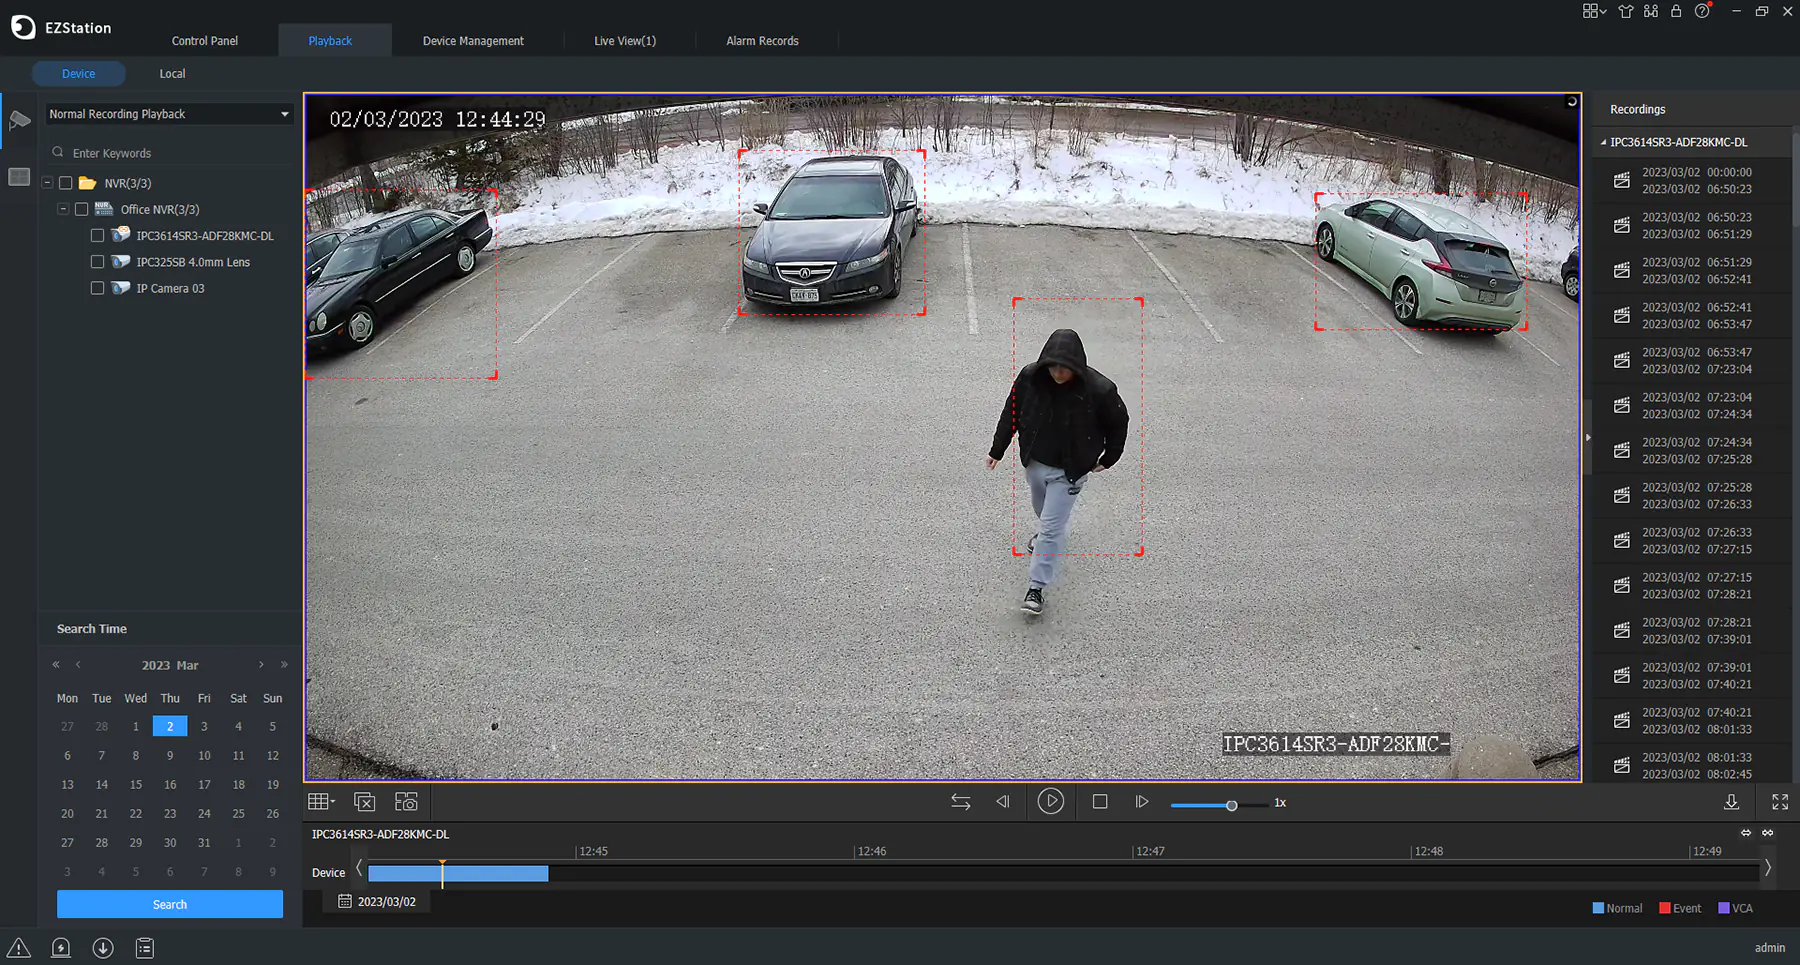 EZStation 3.0 software on PC showing a security camera with a red bounding box around vehicles and people